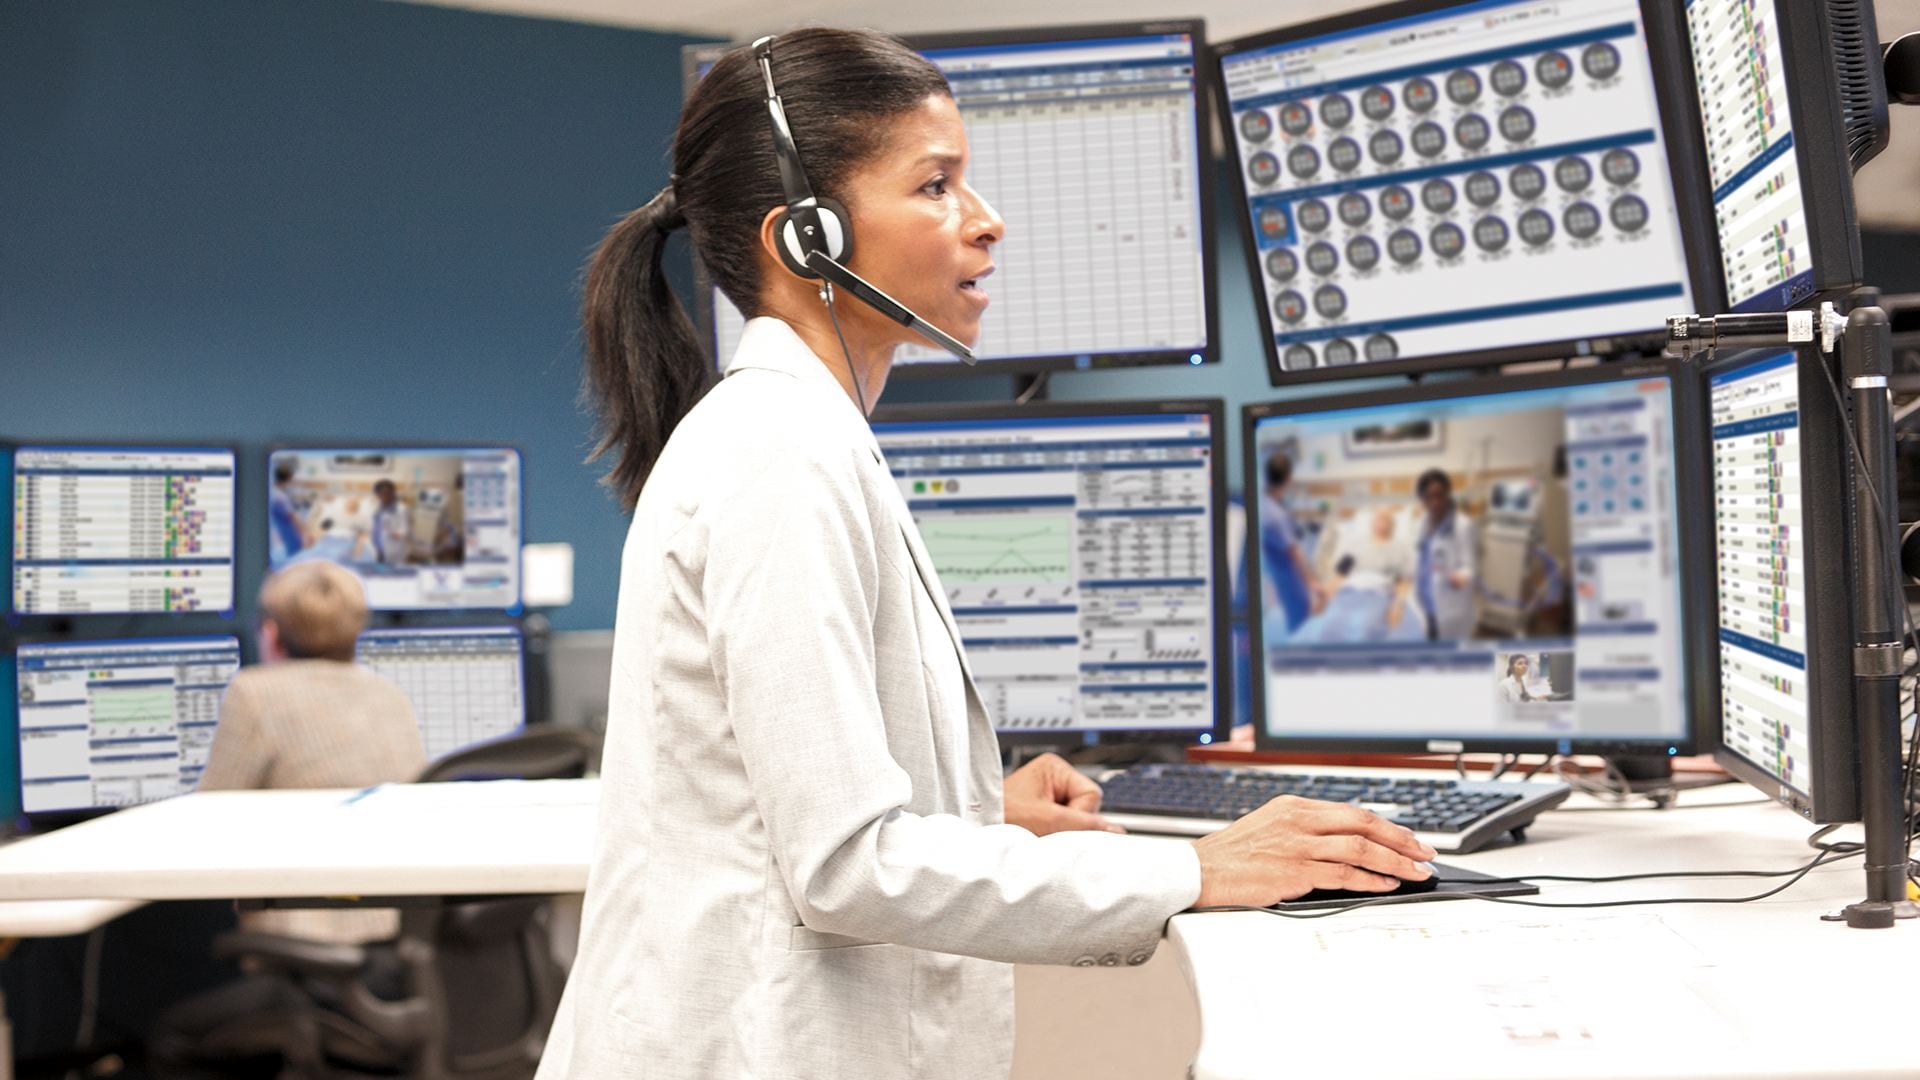 10 examples of telehealth in action that gives a glimpse into the future of care